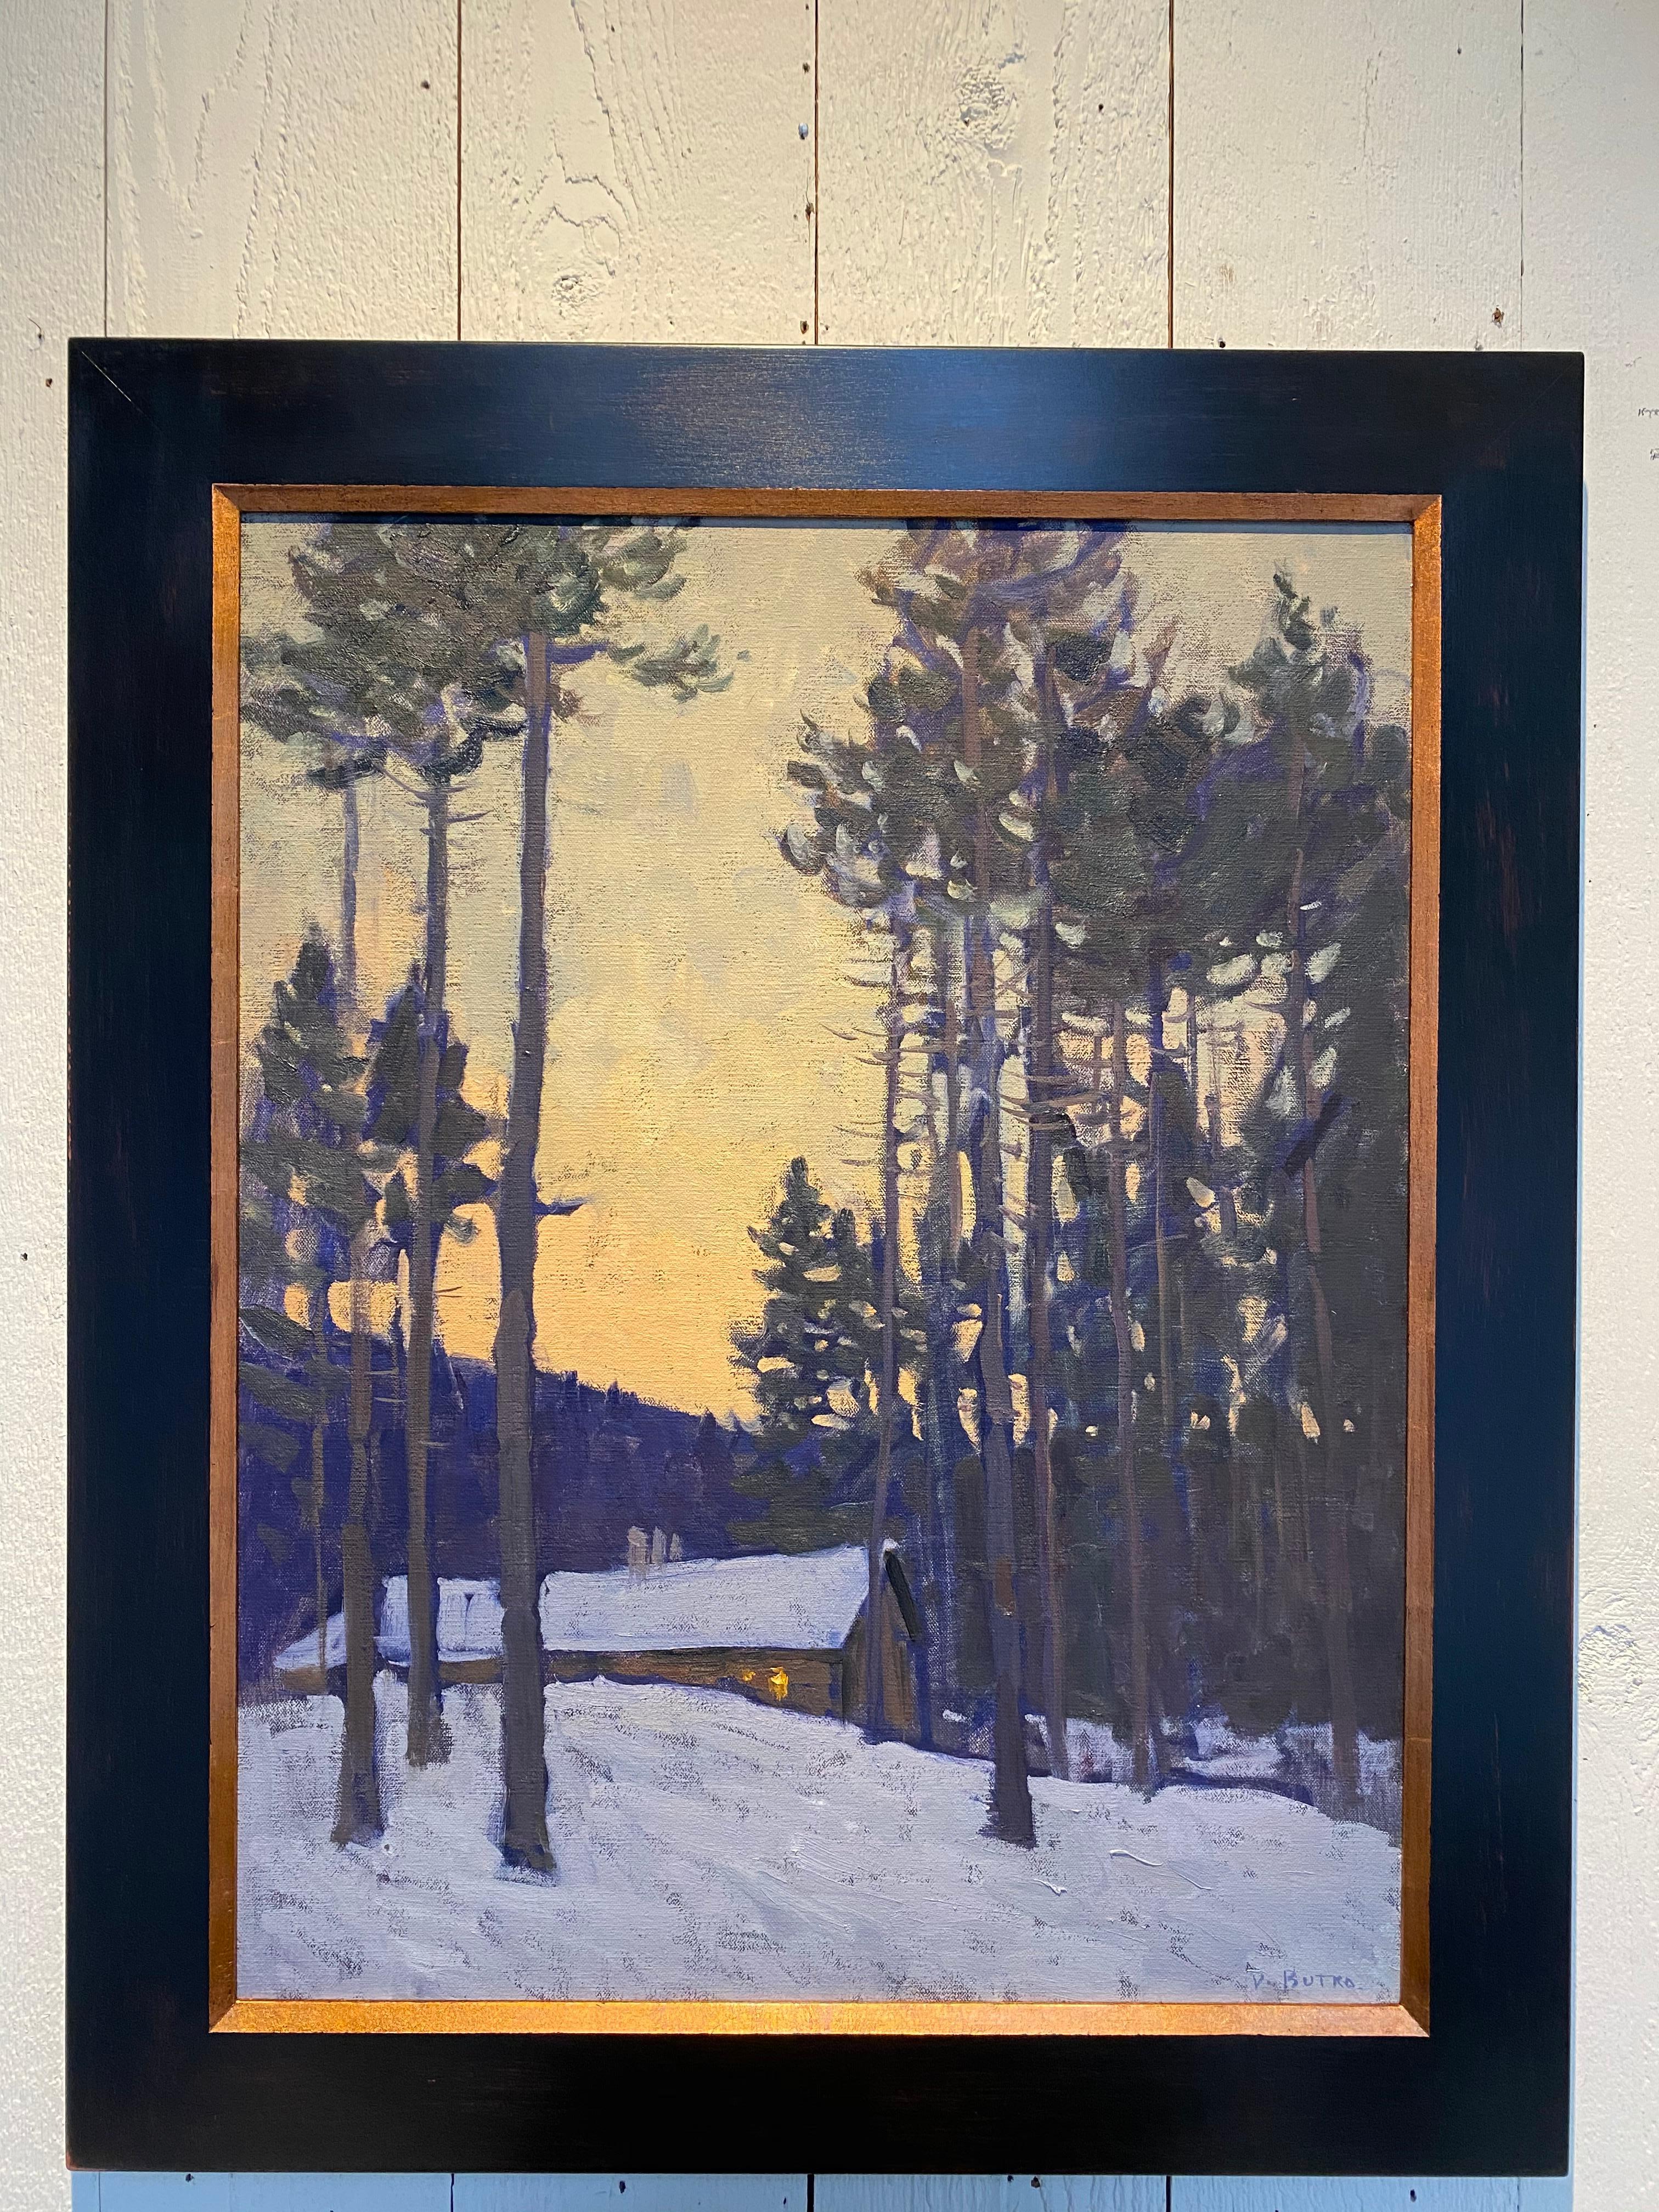 An oil painting of a lit cottage in the snowy woods. Painted en plein air, during quarantine for the Covid-19 outbreak, in February of 2020. This sugar shack is backlit from the yellow orange sunset above. Tall trees flank each side of the